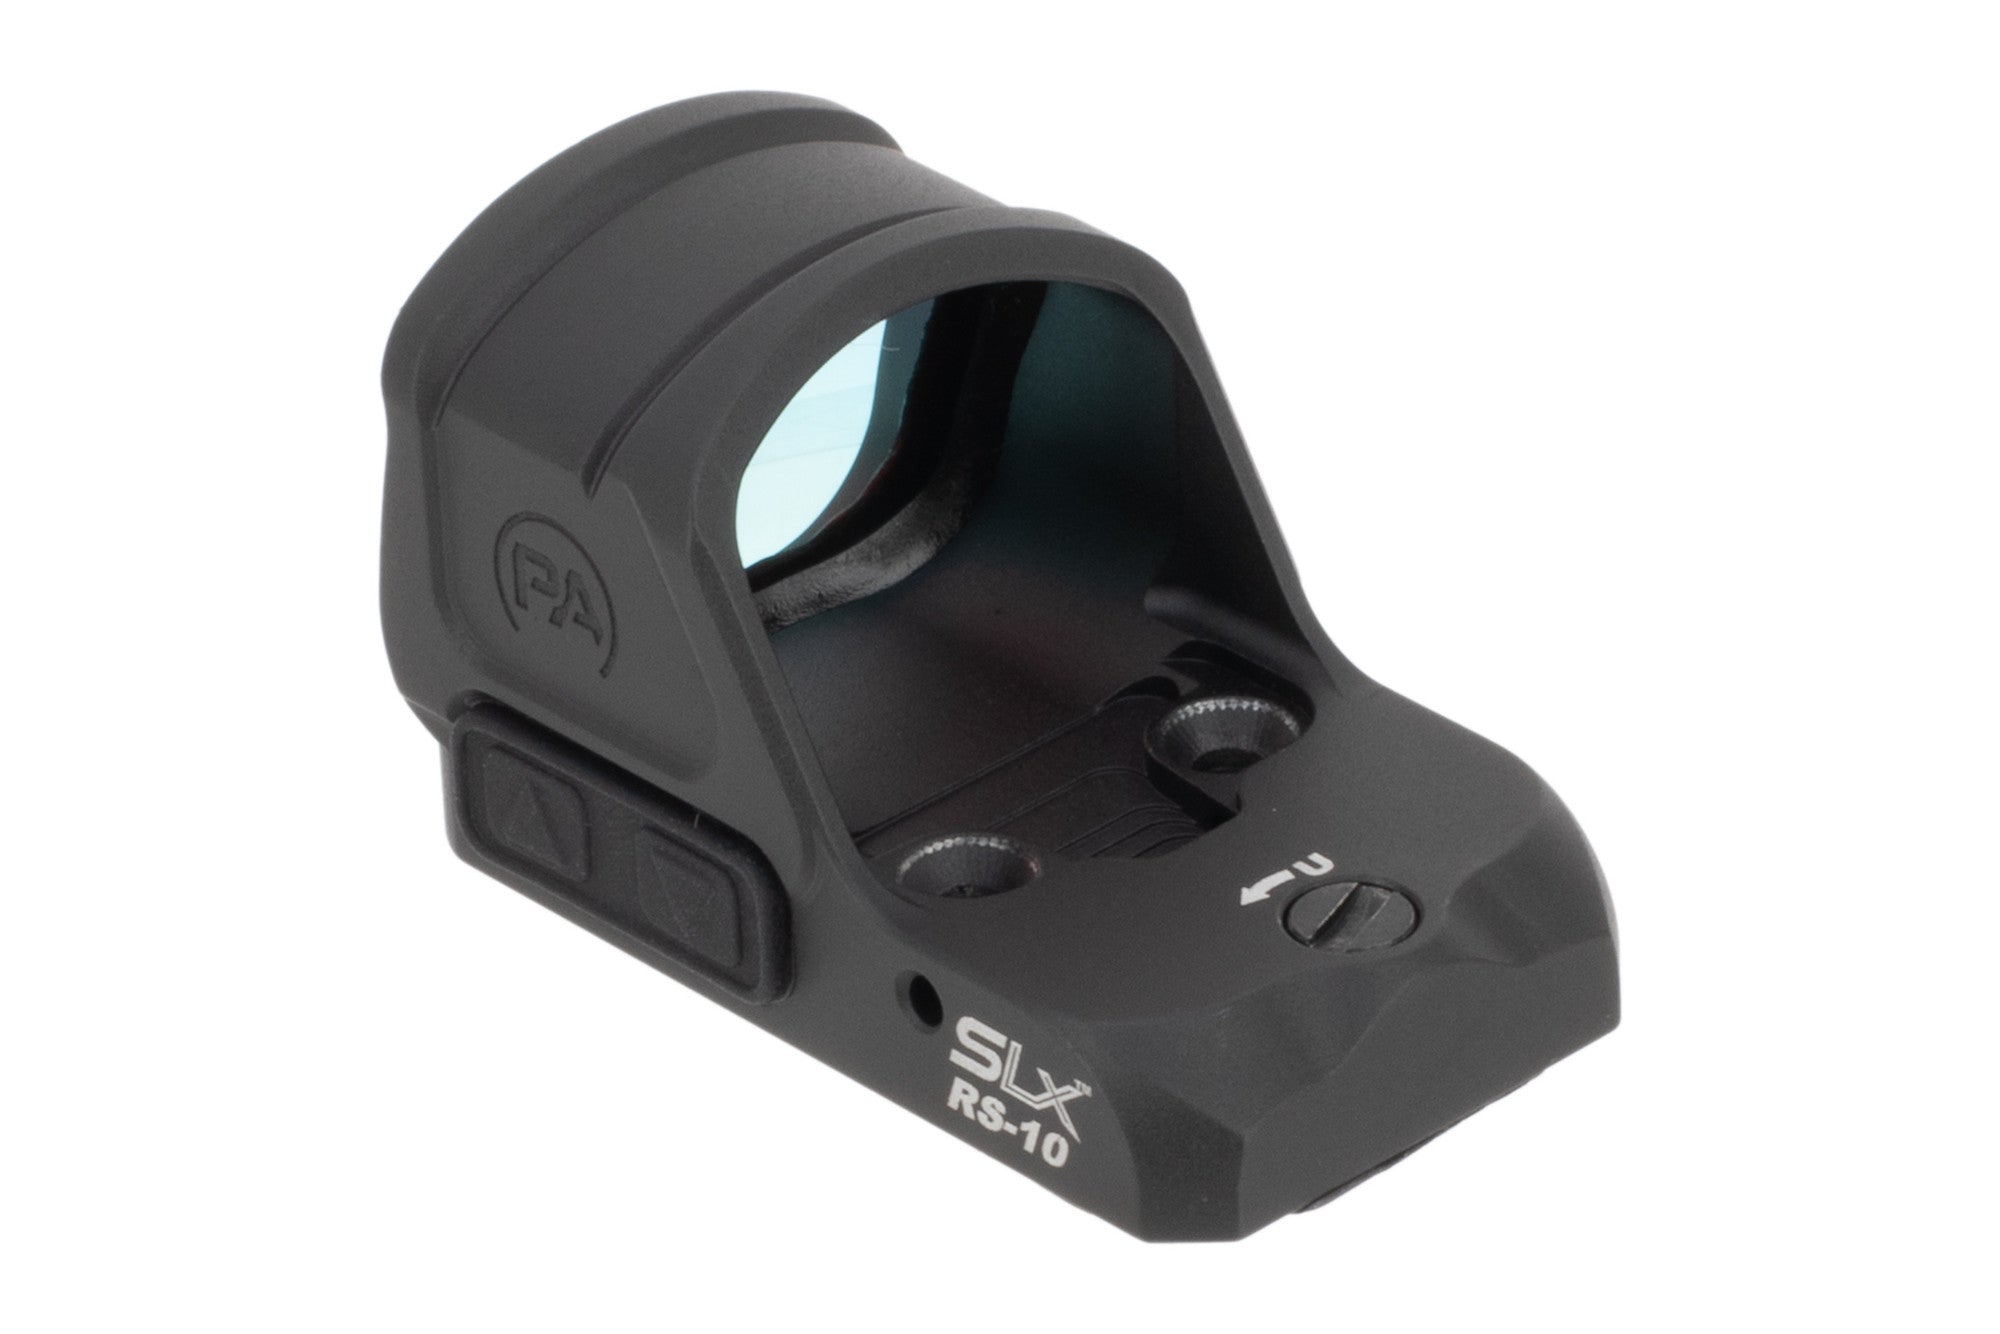 Primary Arms SLx RS-10 3 MOA Red Dot Sight - Docter Footprint - Glock MOS Adapter Included